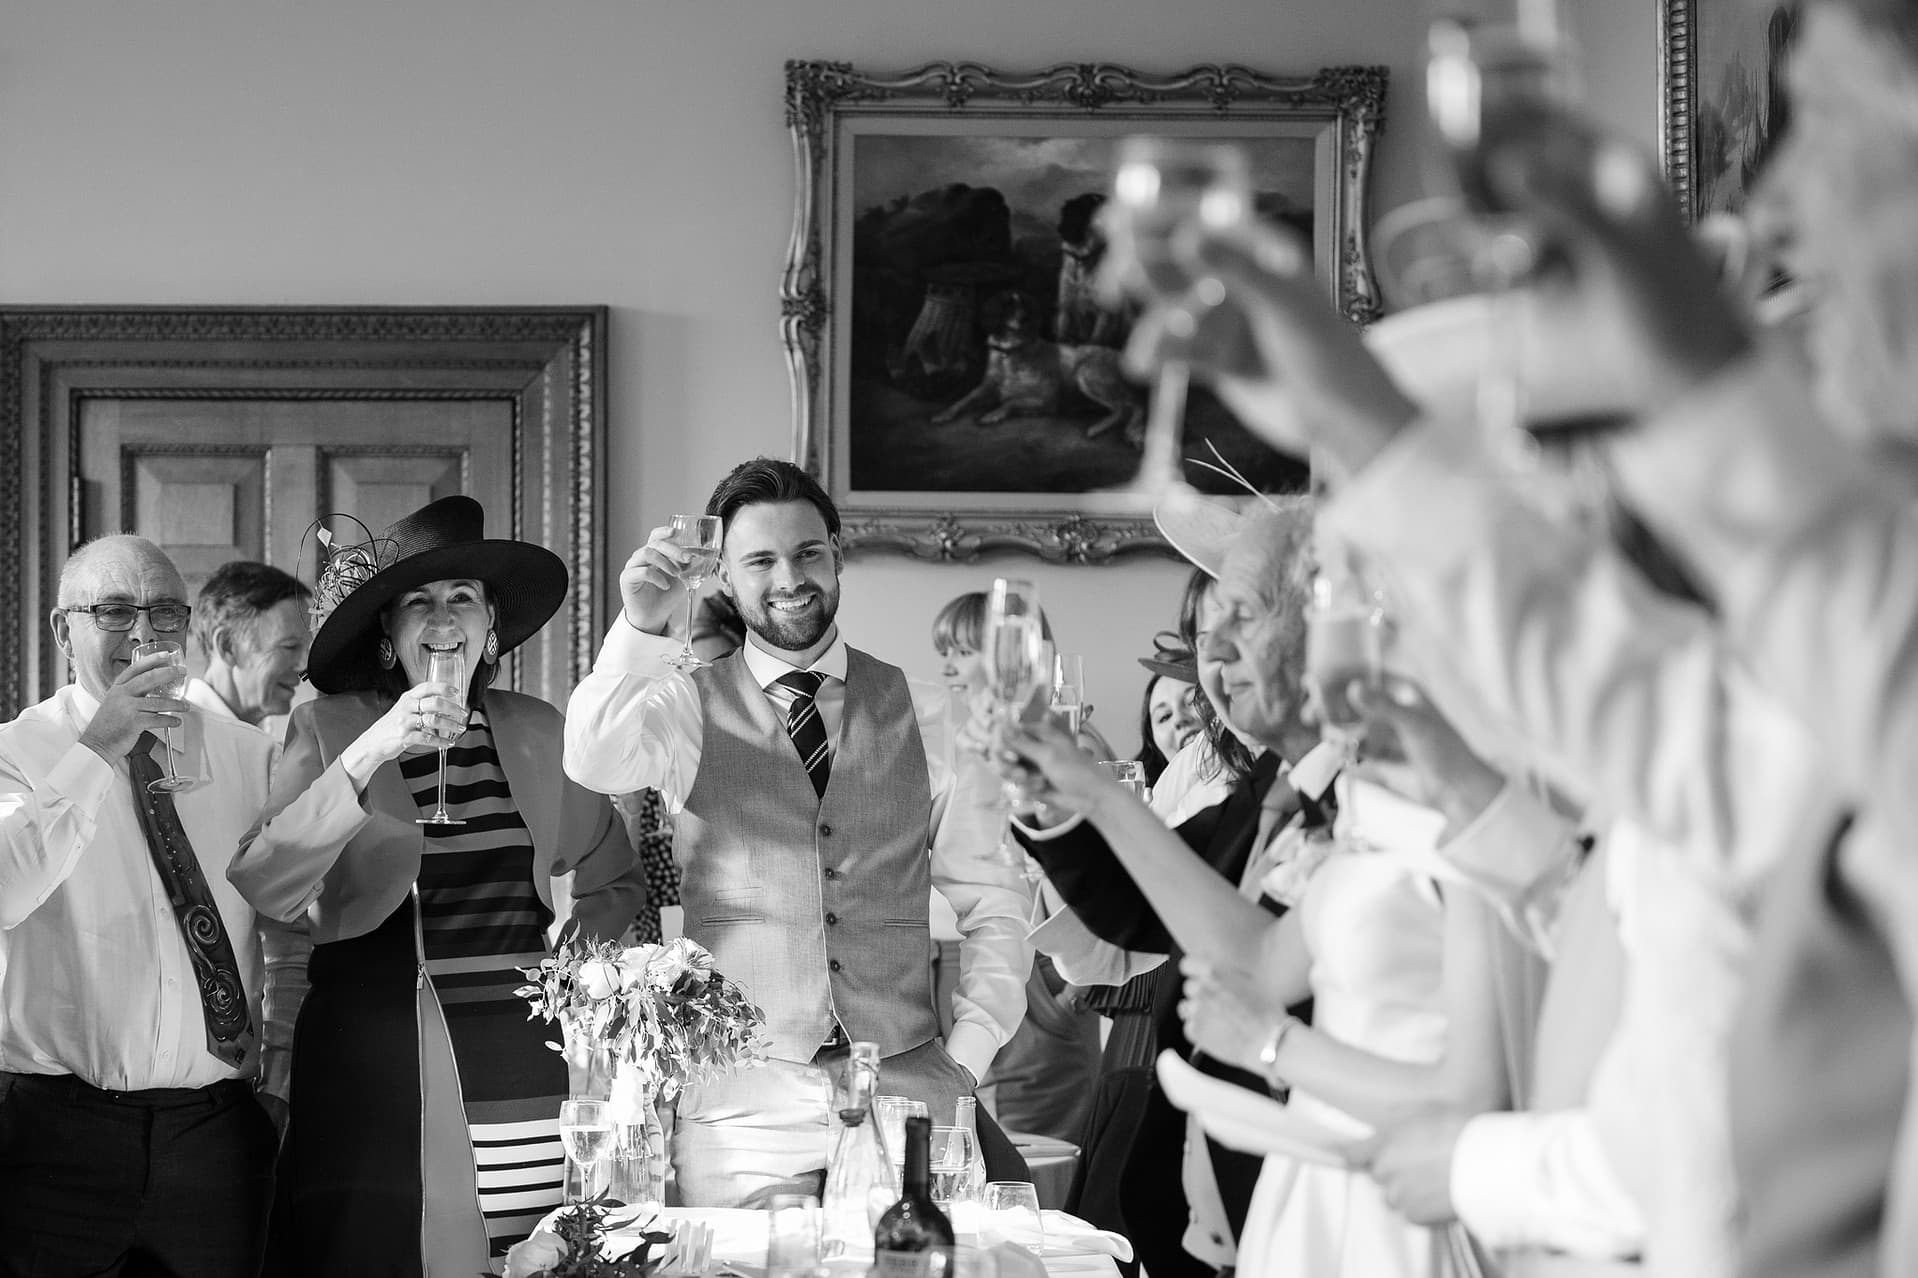 Wedding guests raising their glasses for a toast during the speeches